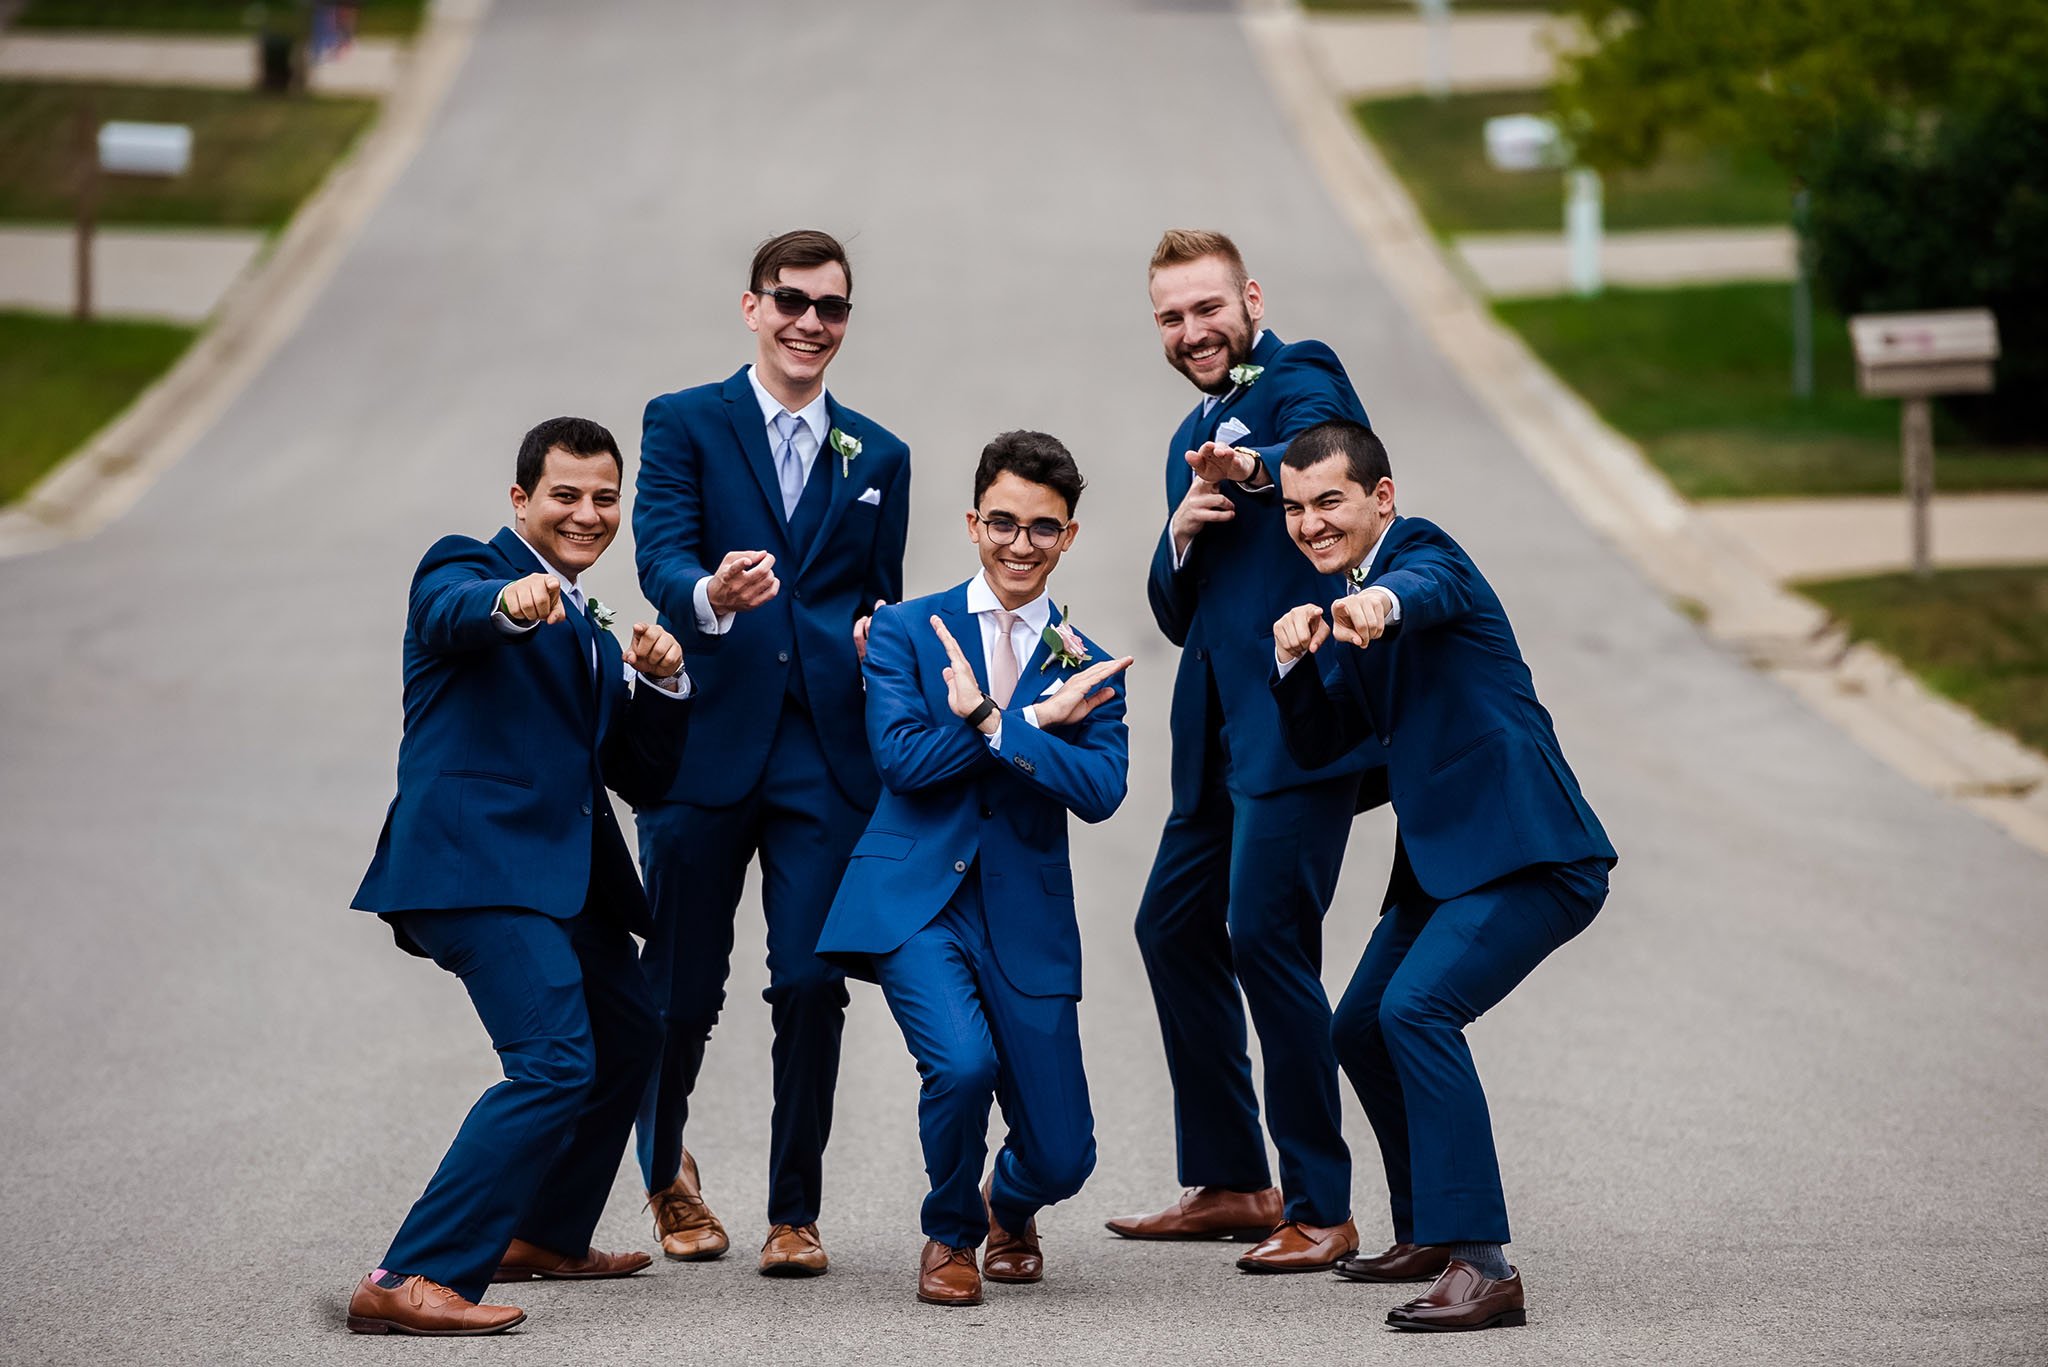 Northalsted (Boystown) wedding photographer - Chicago